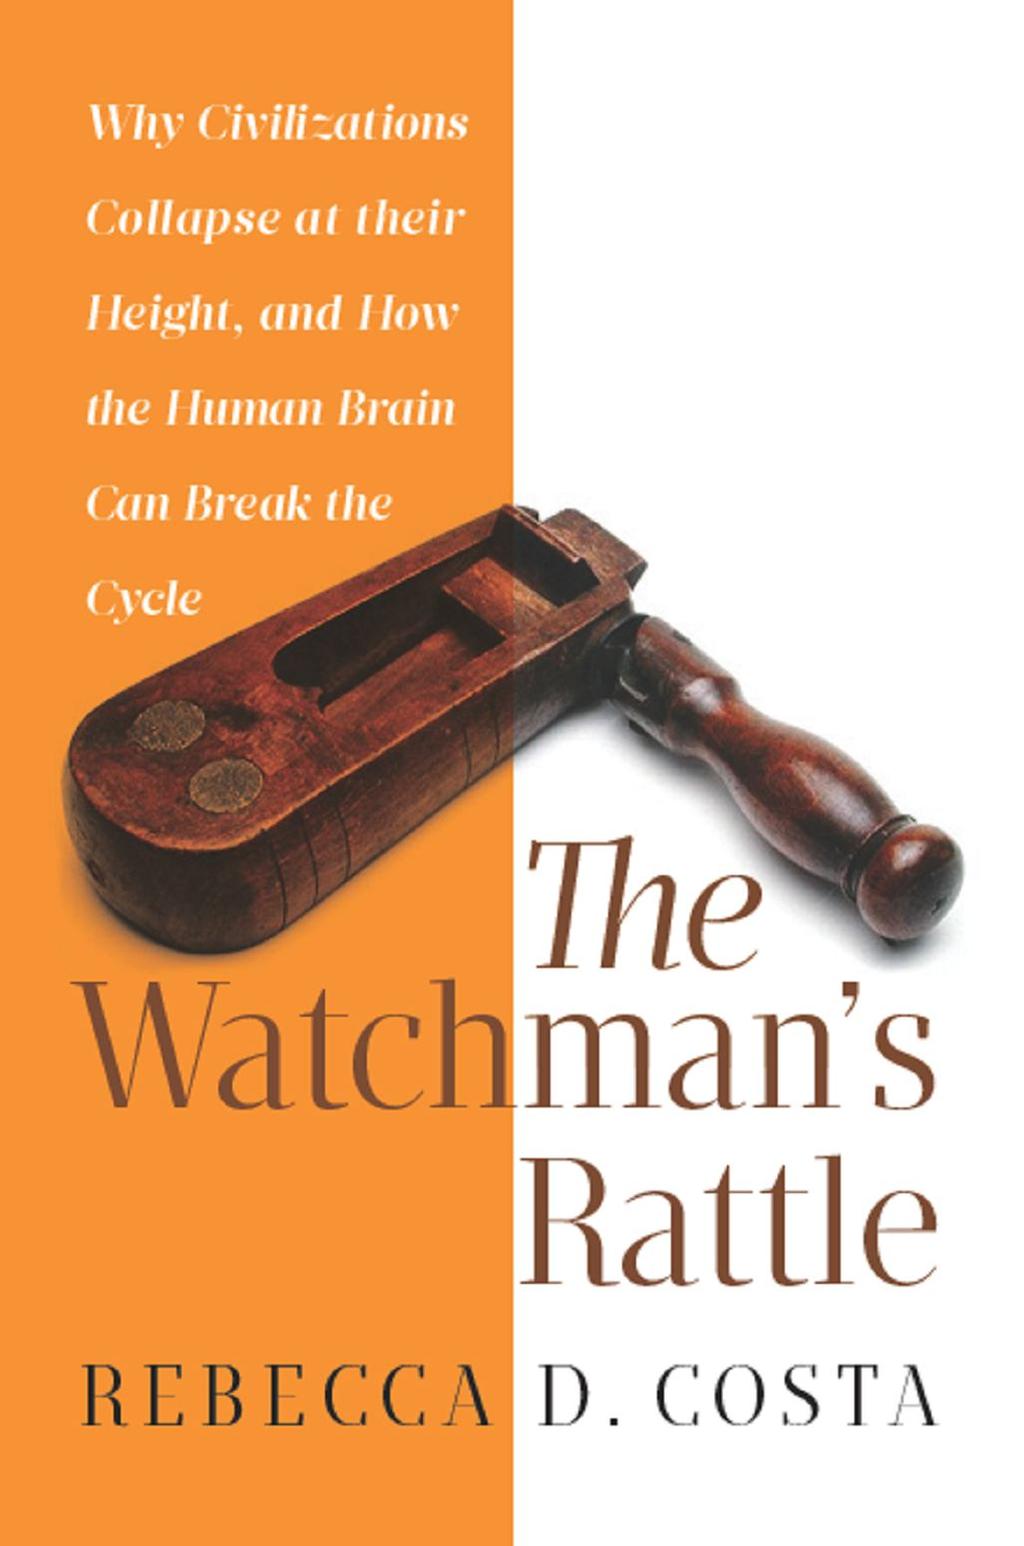 The Watchman s s Rattle By Rebecca D Costa On Sale October 5 ISBN 9781593156053 $25.